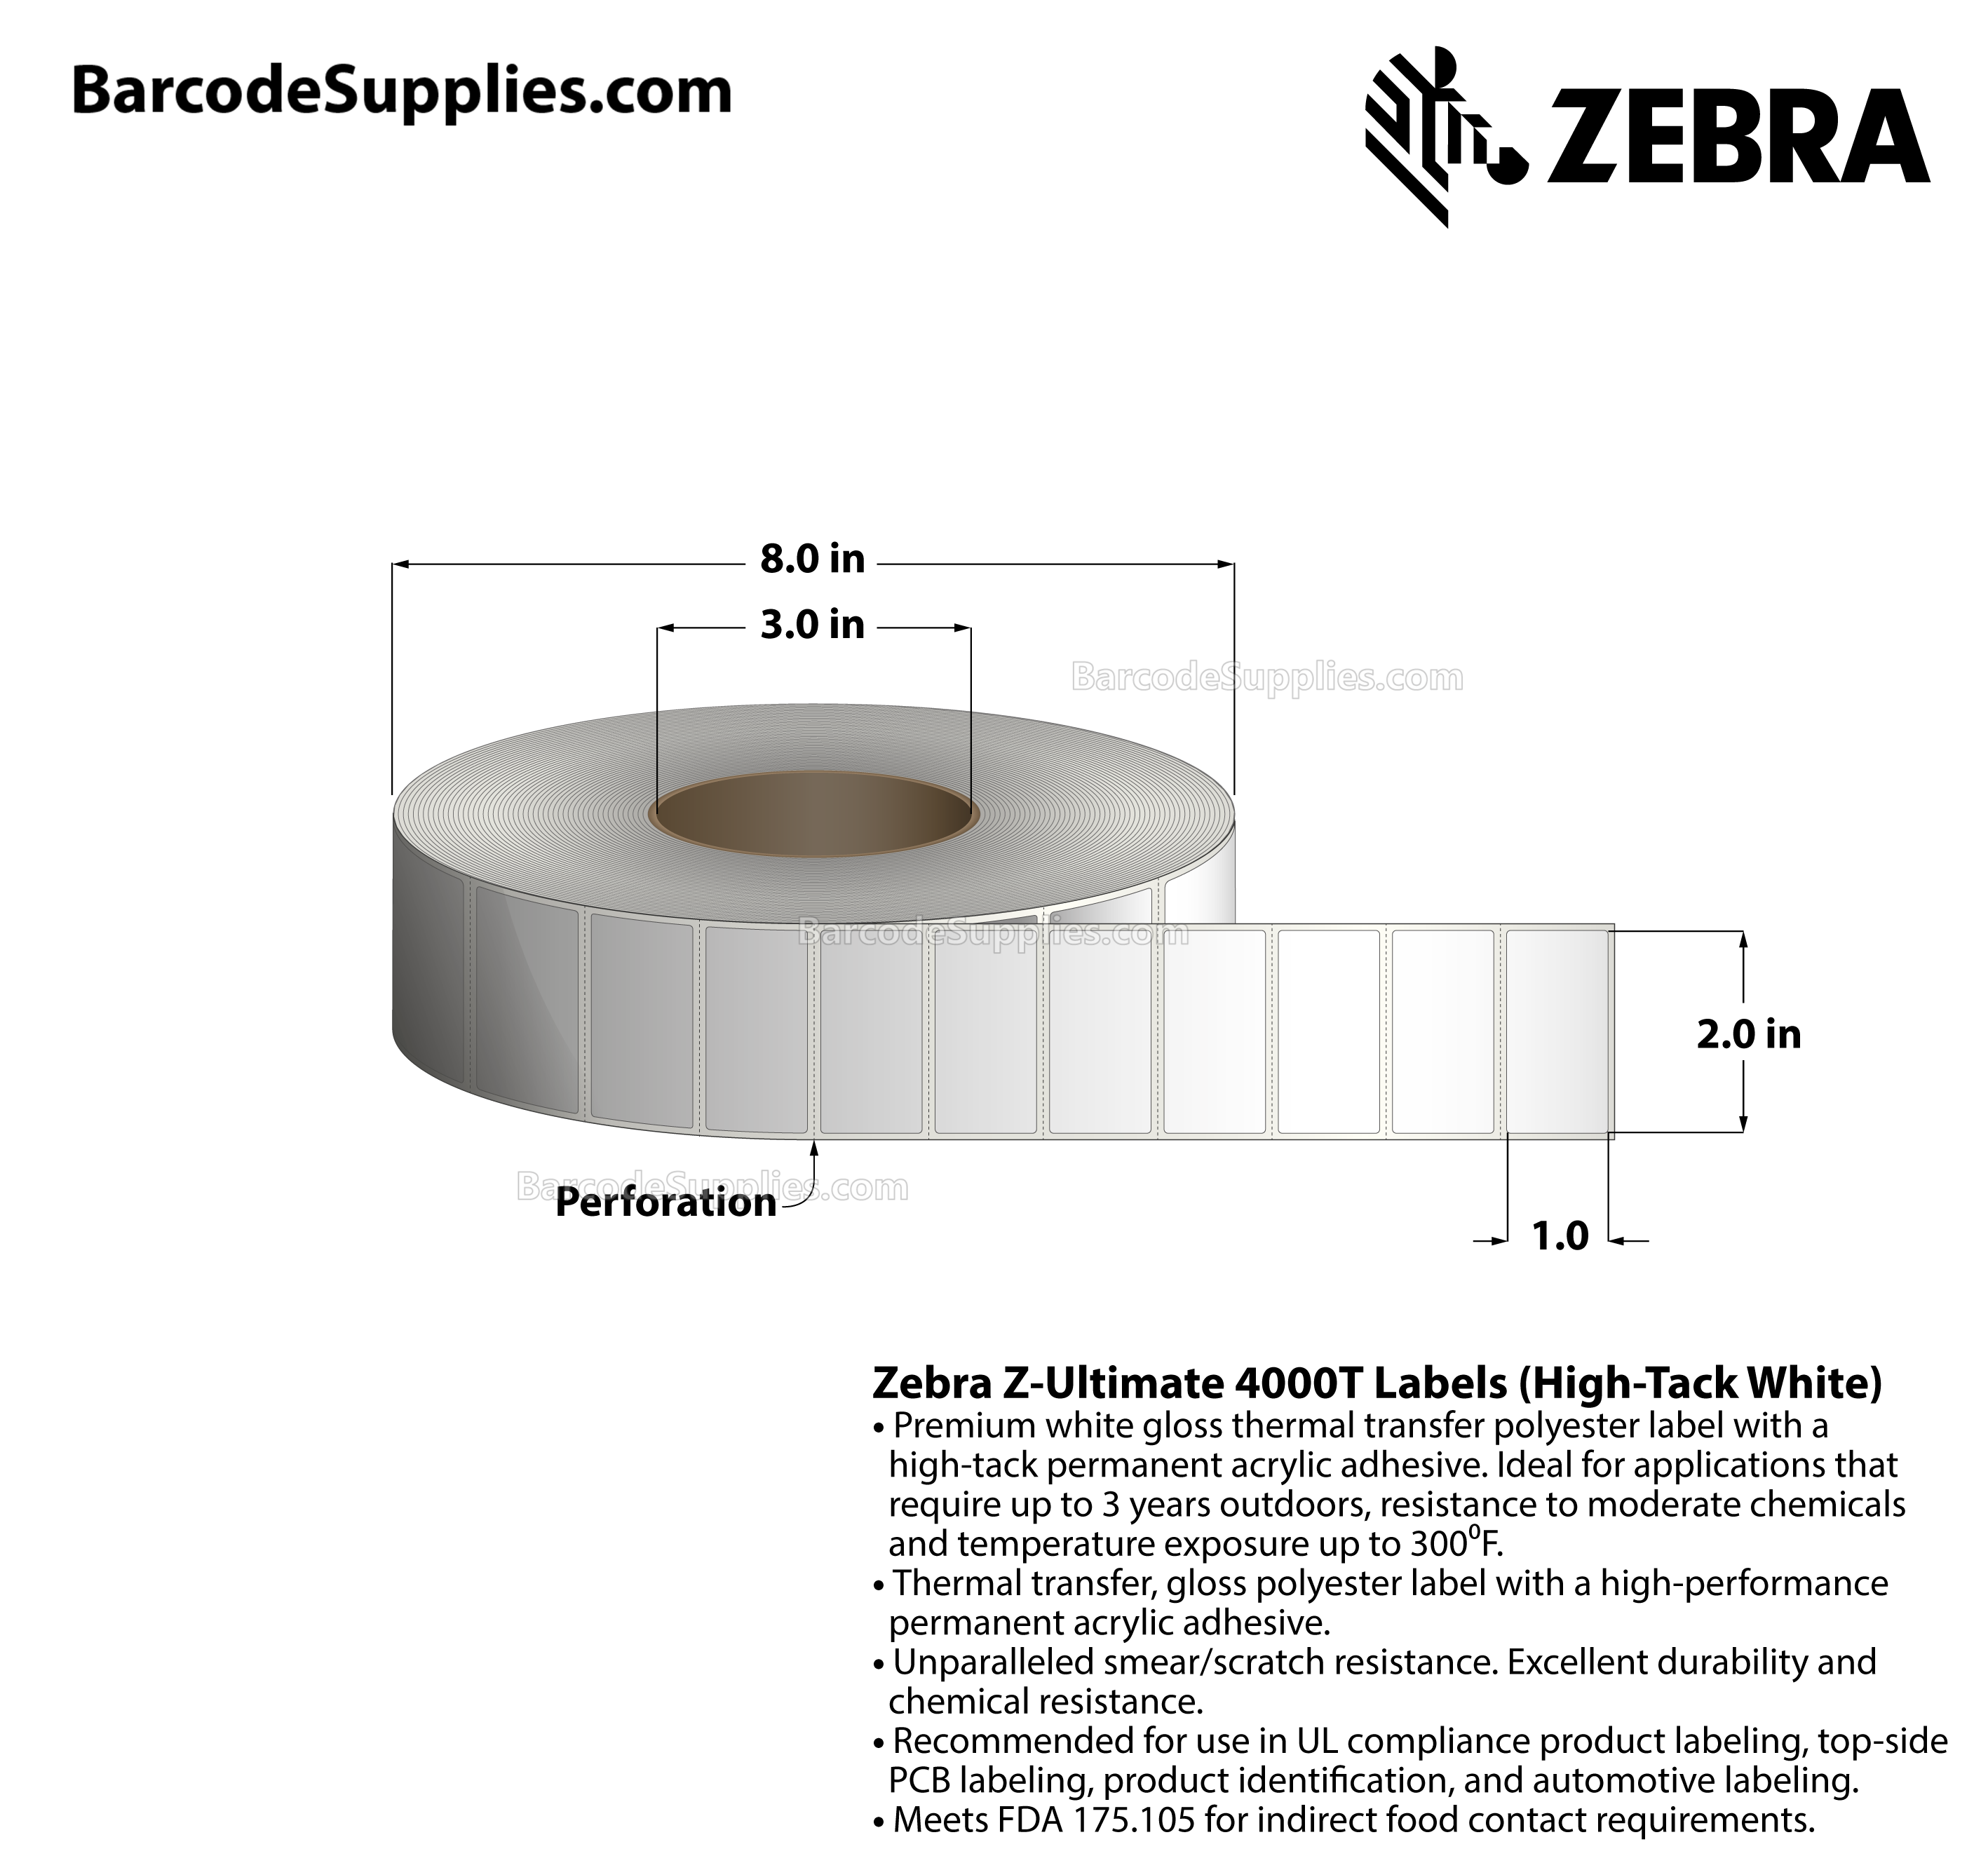 2 x 1 Thermal Transfer White Z-Ultimate 4000T High-Tack White Labels With High-tack Adhesive - Perforated - 4300 Labels Per Roll - Carton Of 4 Rolls - 17200 Labels Total - MPN: 10008521